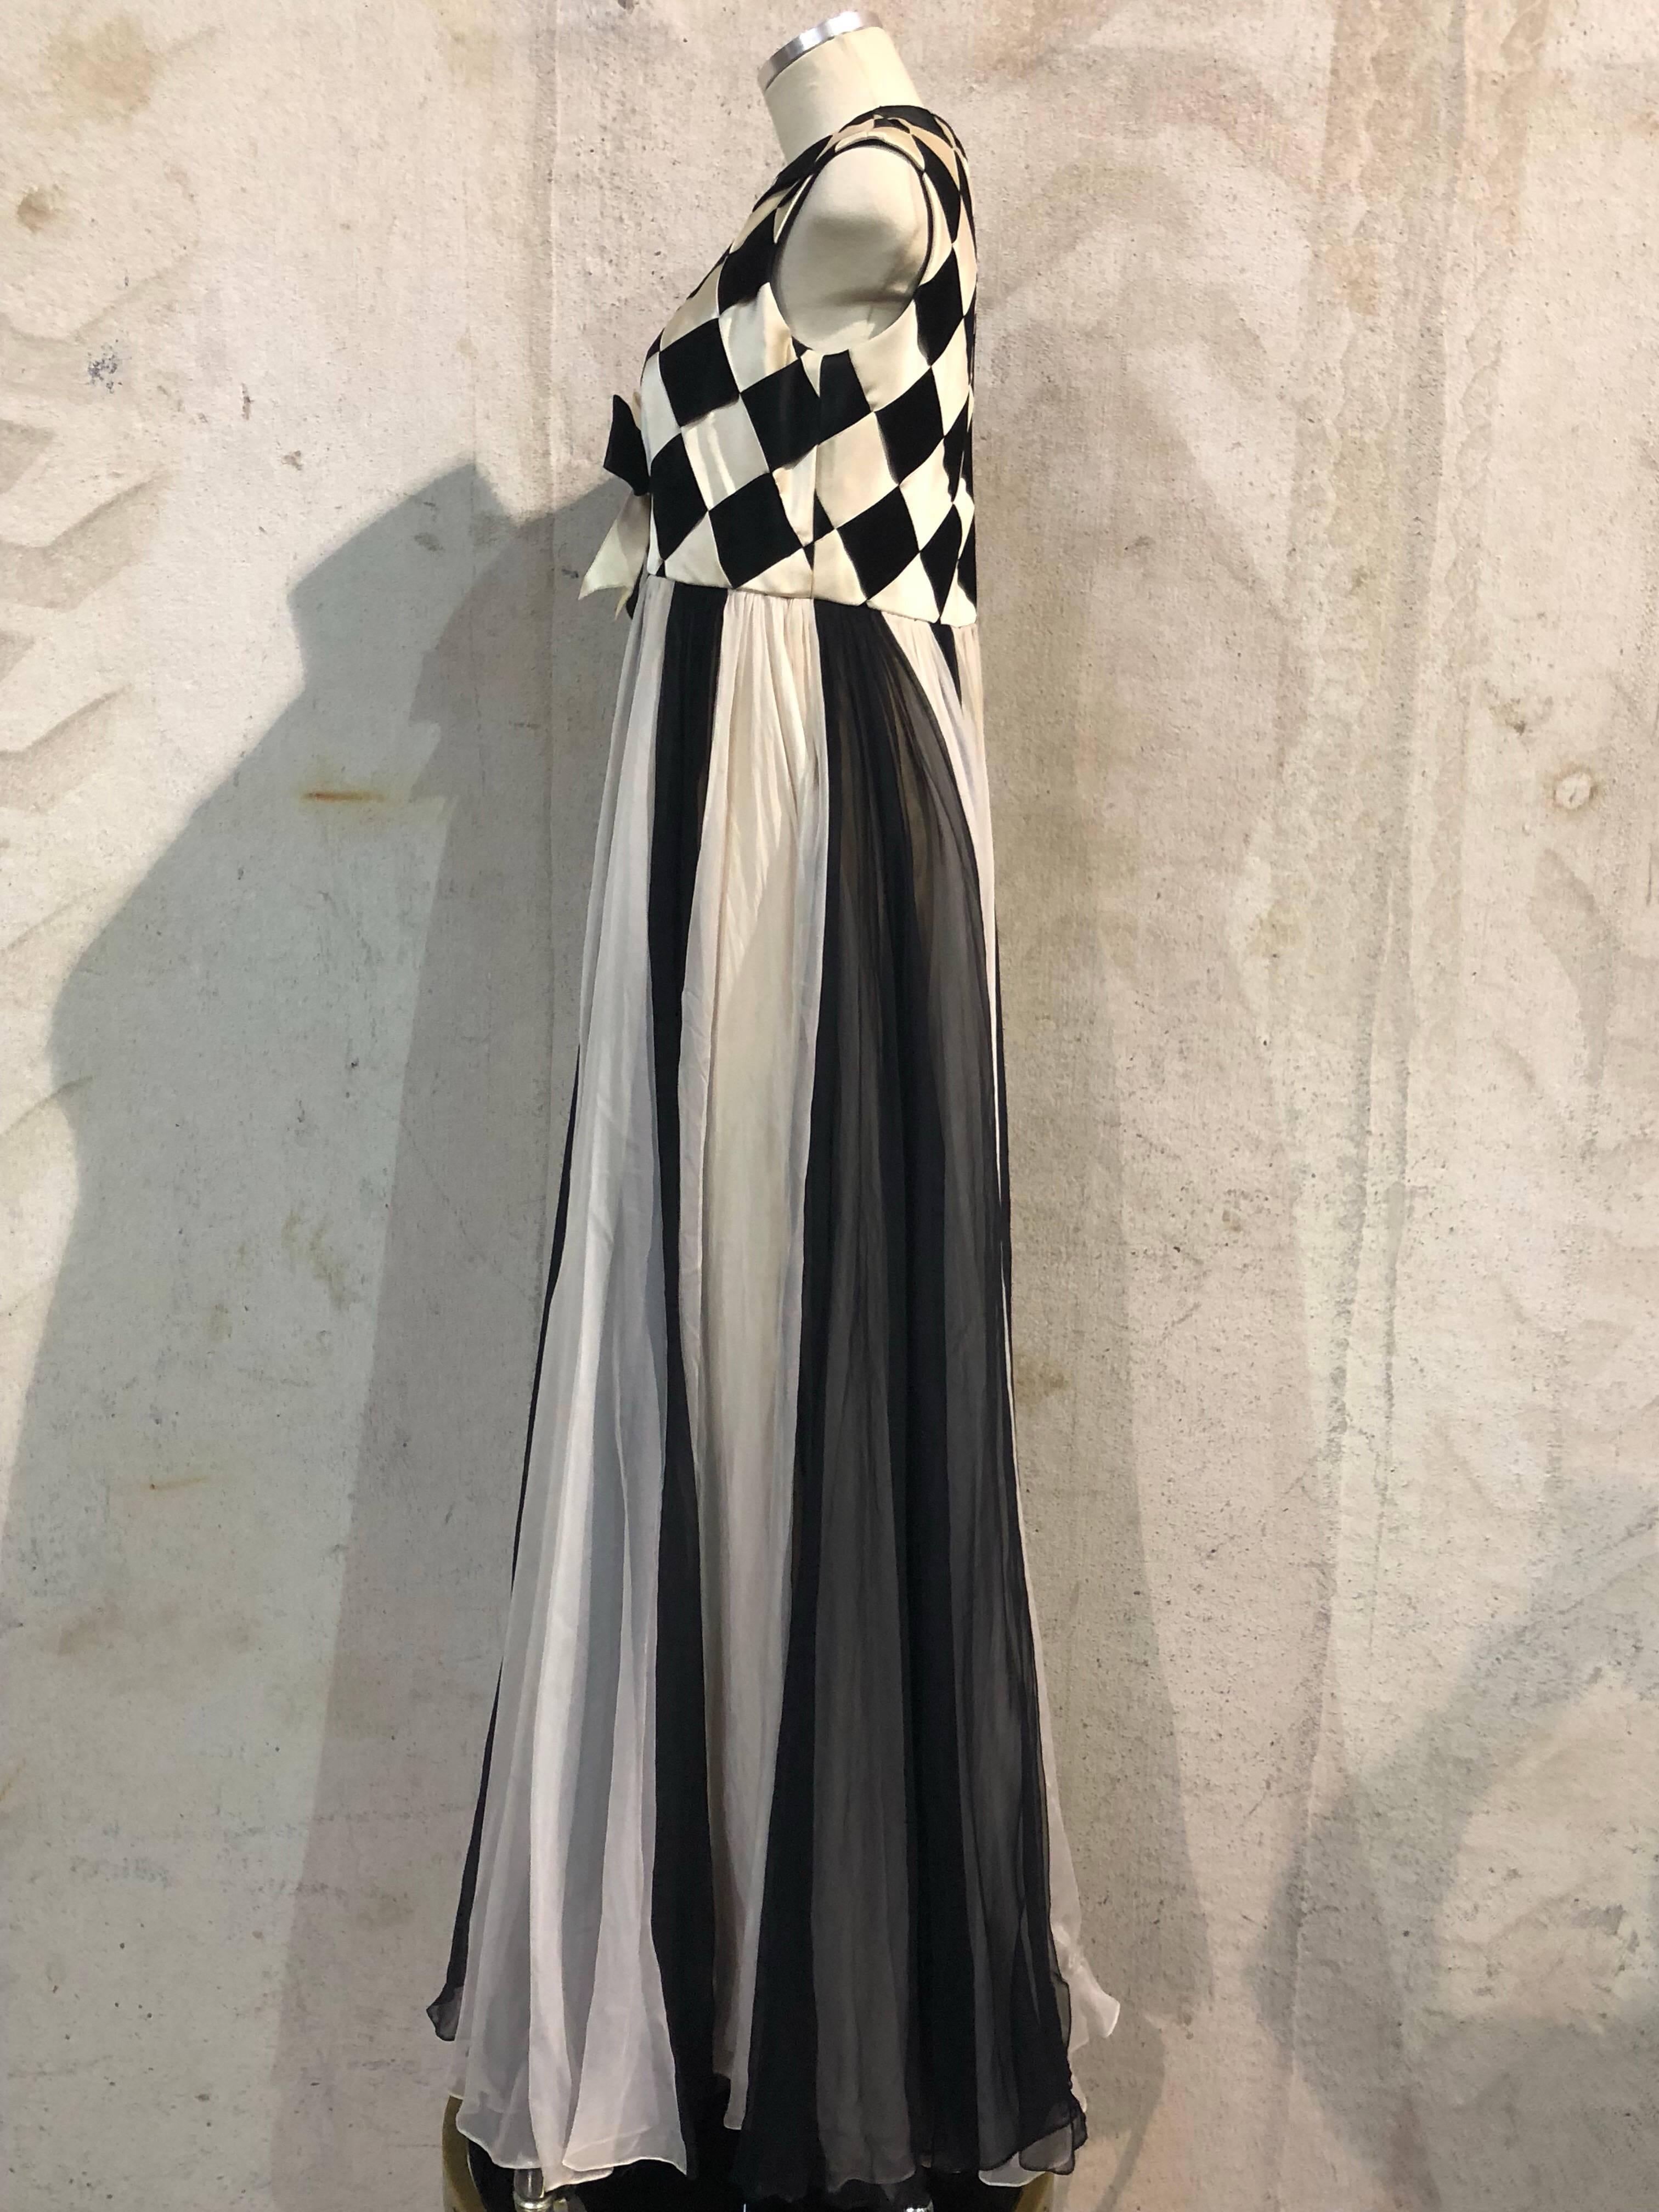 1960s Sarmi black & white Harlequin evening gown: black and white silk satin ribbon woven sleeveless bodice with bow at front under bust.  At empire, ribbons flow into bias cut godet panels which are full and layered. Fully lined in rayon crepe. 